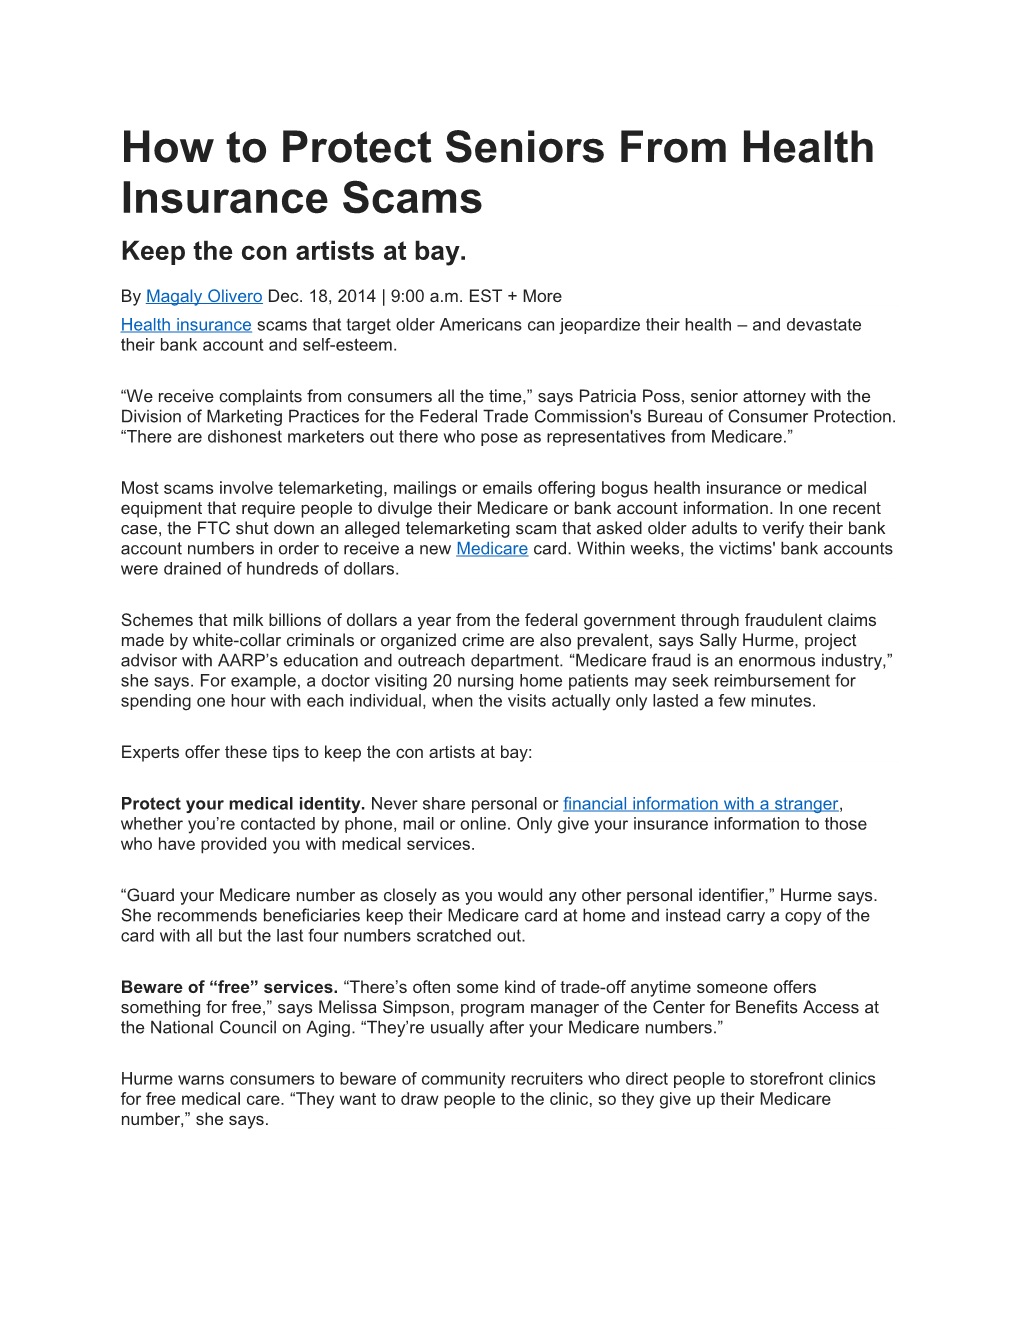 How to Protect Seniors from Health Insurance Scams